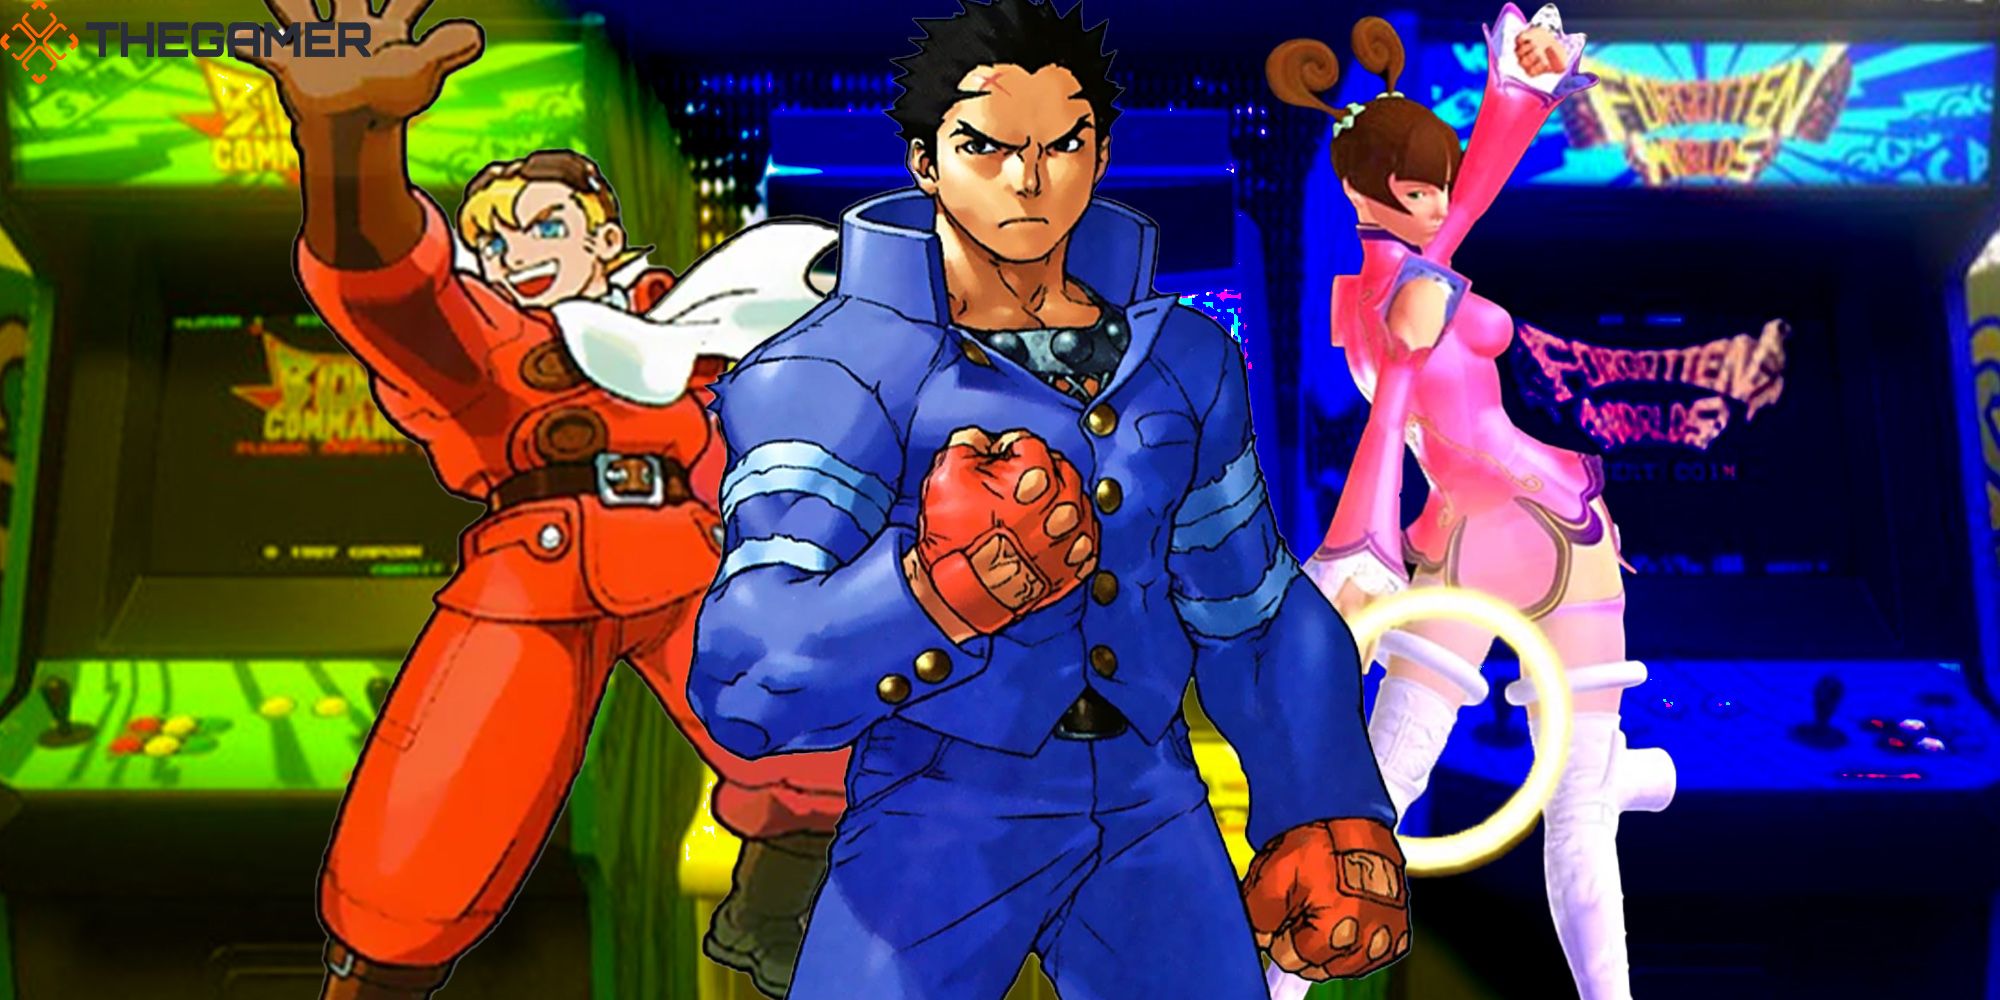 Falcon from Power Stone, Batsu from Rival Schools, and June from Star Gladiator, stand in front of a row of blue and yellow tinted arcade cabinets.